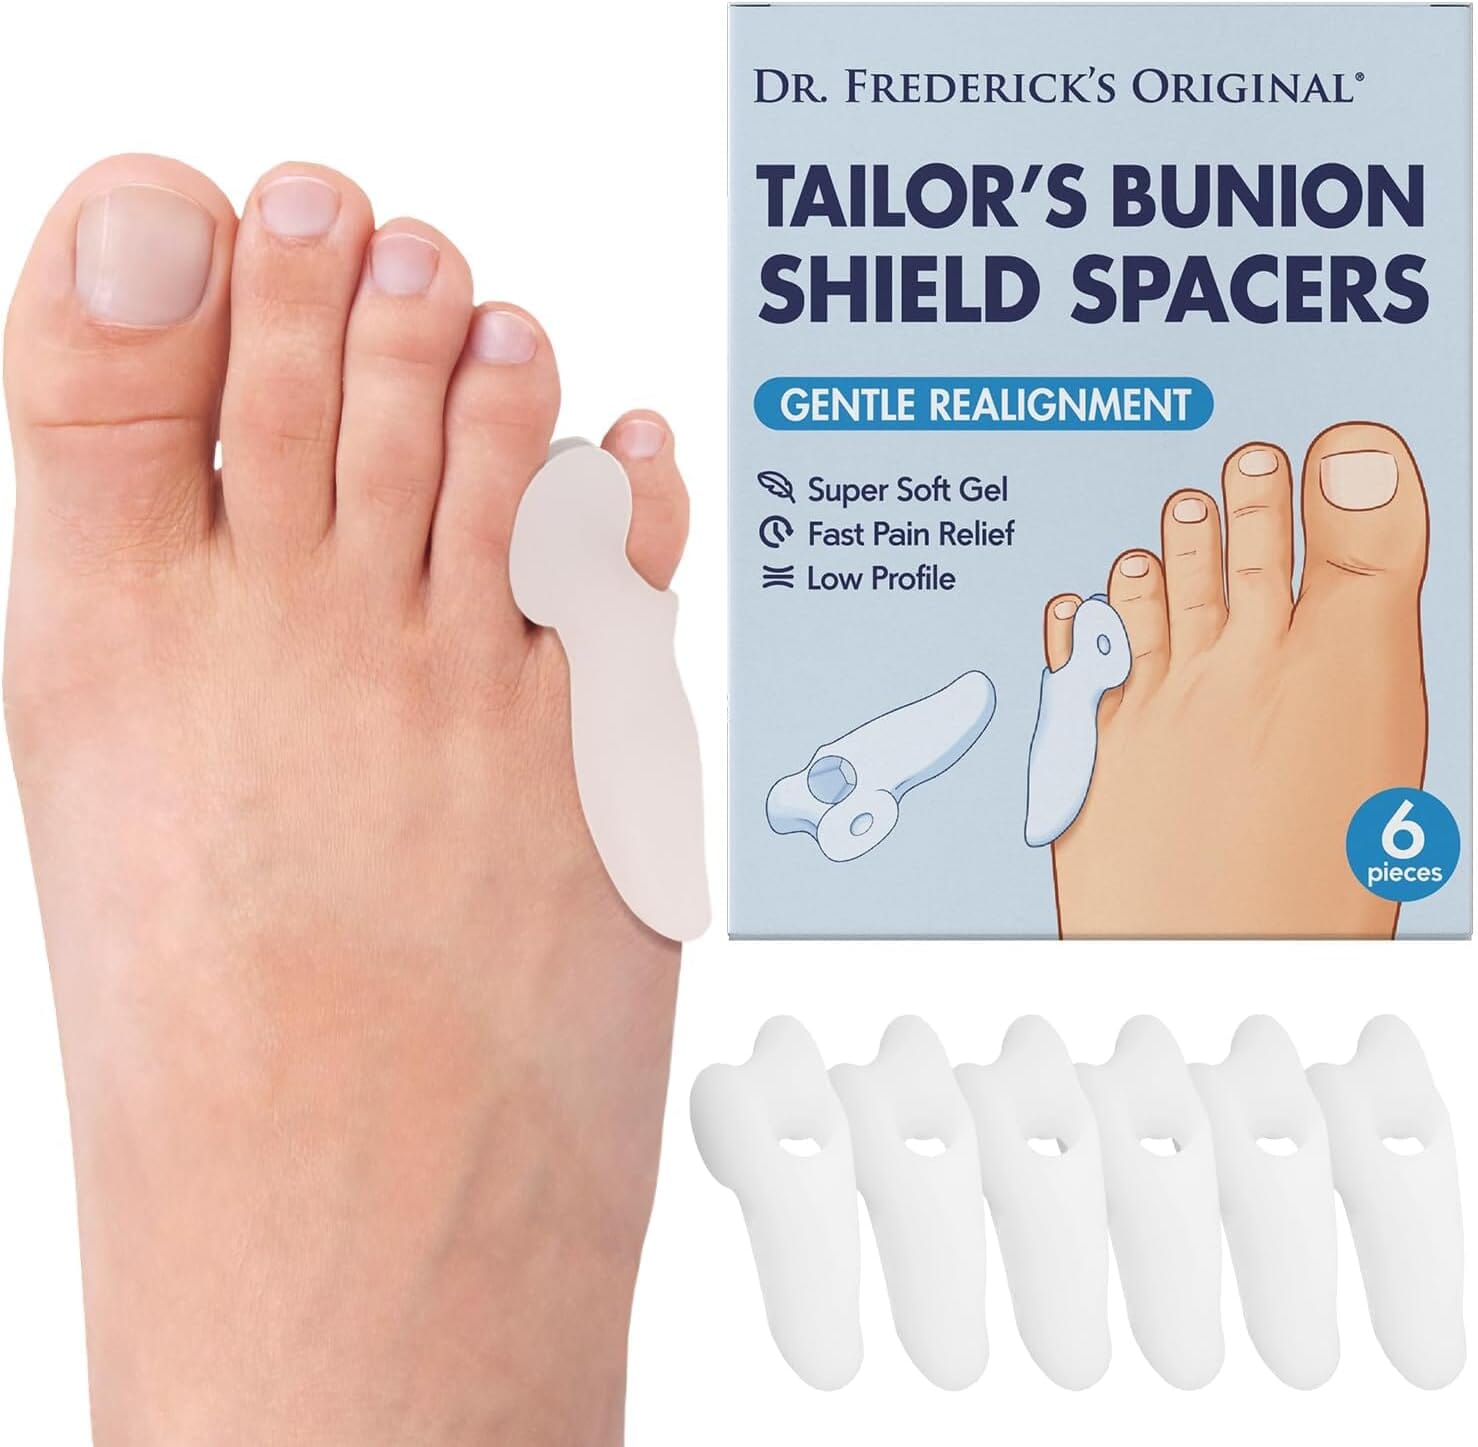 Dr. Frederick's Original Tailor's Bunion Shield Spacers - Soft Gel Bunionette Pads with Spacer - Tailors Bunion Pad Corrector - Fast Pain Relief for Men & Women - Pinky Toe Protection - 6 ct Foot Pain Dr. Frederick's Original 